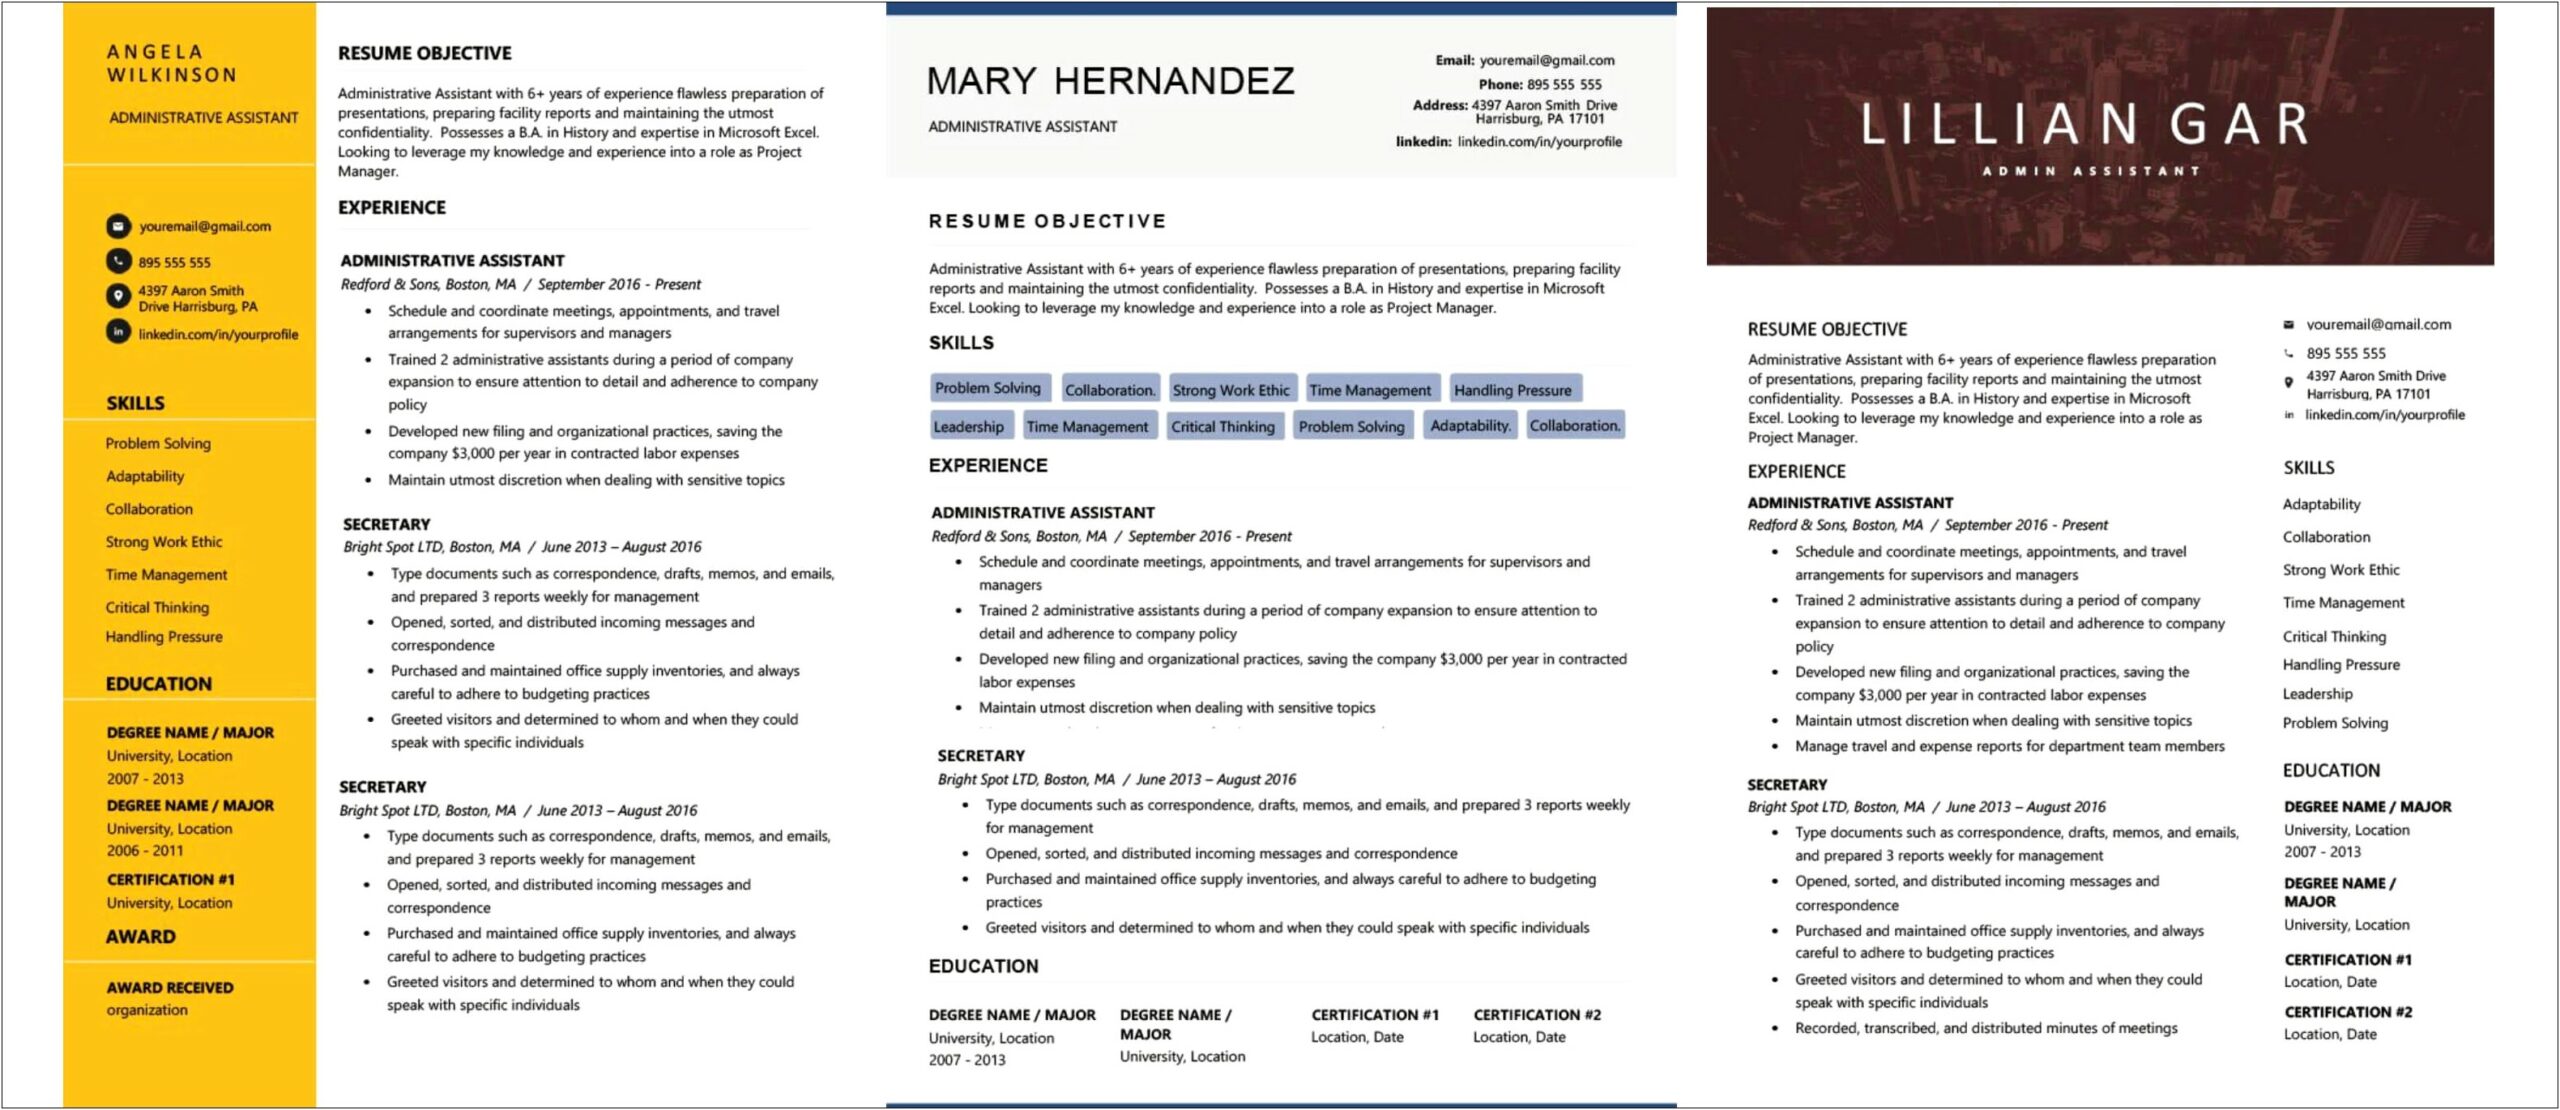 Engineering Manager Key Terms On Resume